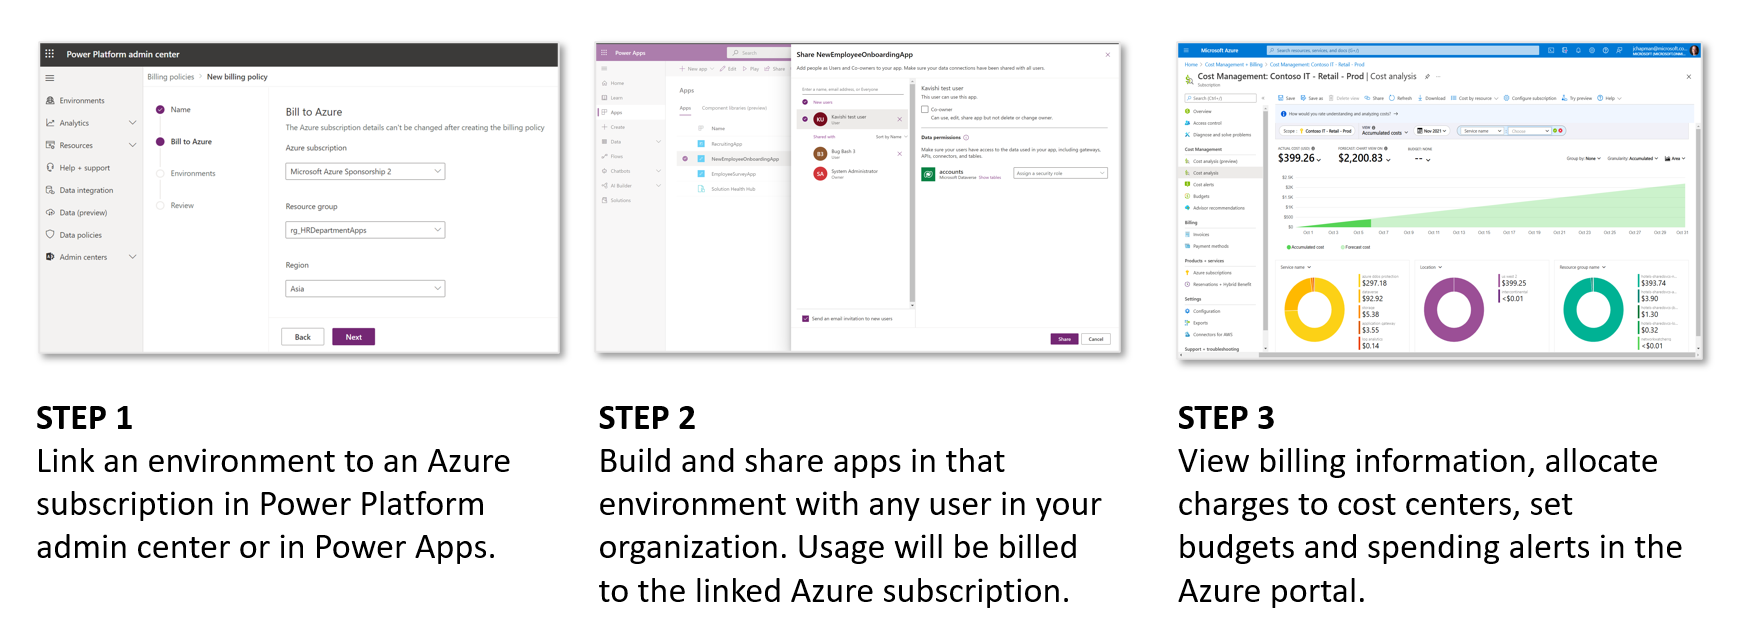 Graphic showing the three steps required to setup pay as you go for Power Apps. Step 1 is to link an environment to an Azure subscription in Power Platform admin center or in Power Apps. Step 2 is to Build and share apps in that environment with any user in your organization. Usage will be billed to the linked Azure subscription. Step 3 is to View billing information, allocate charges to cost centers, set budgets and spending alerts in the Azure portal. 